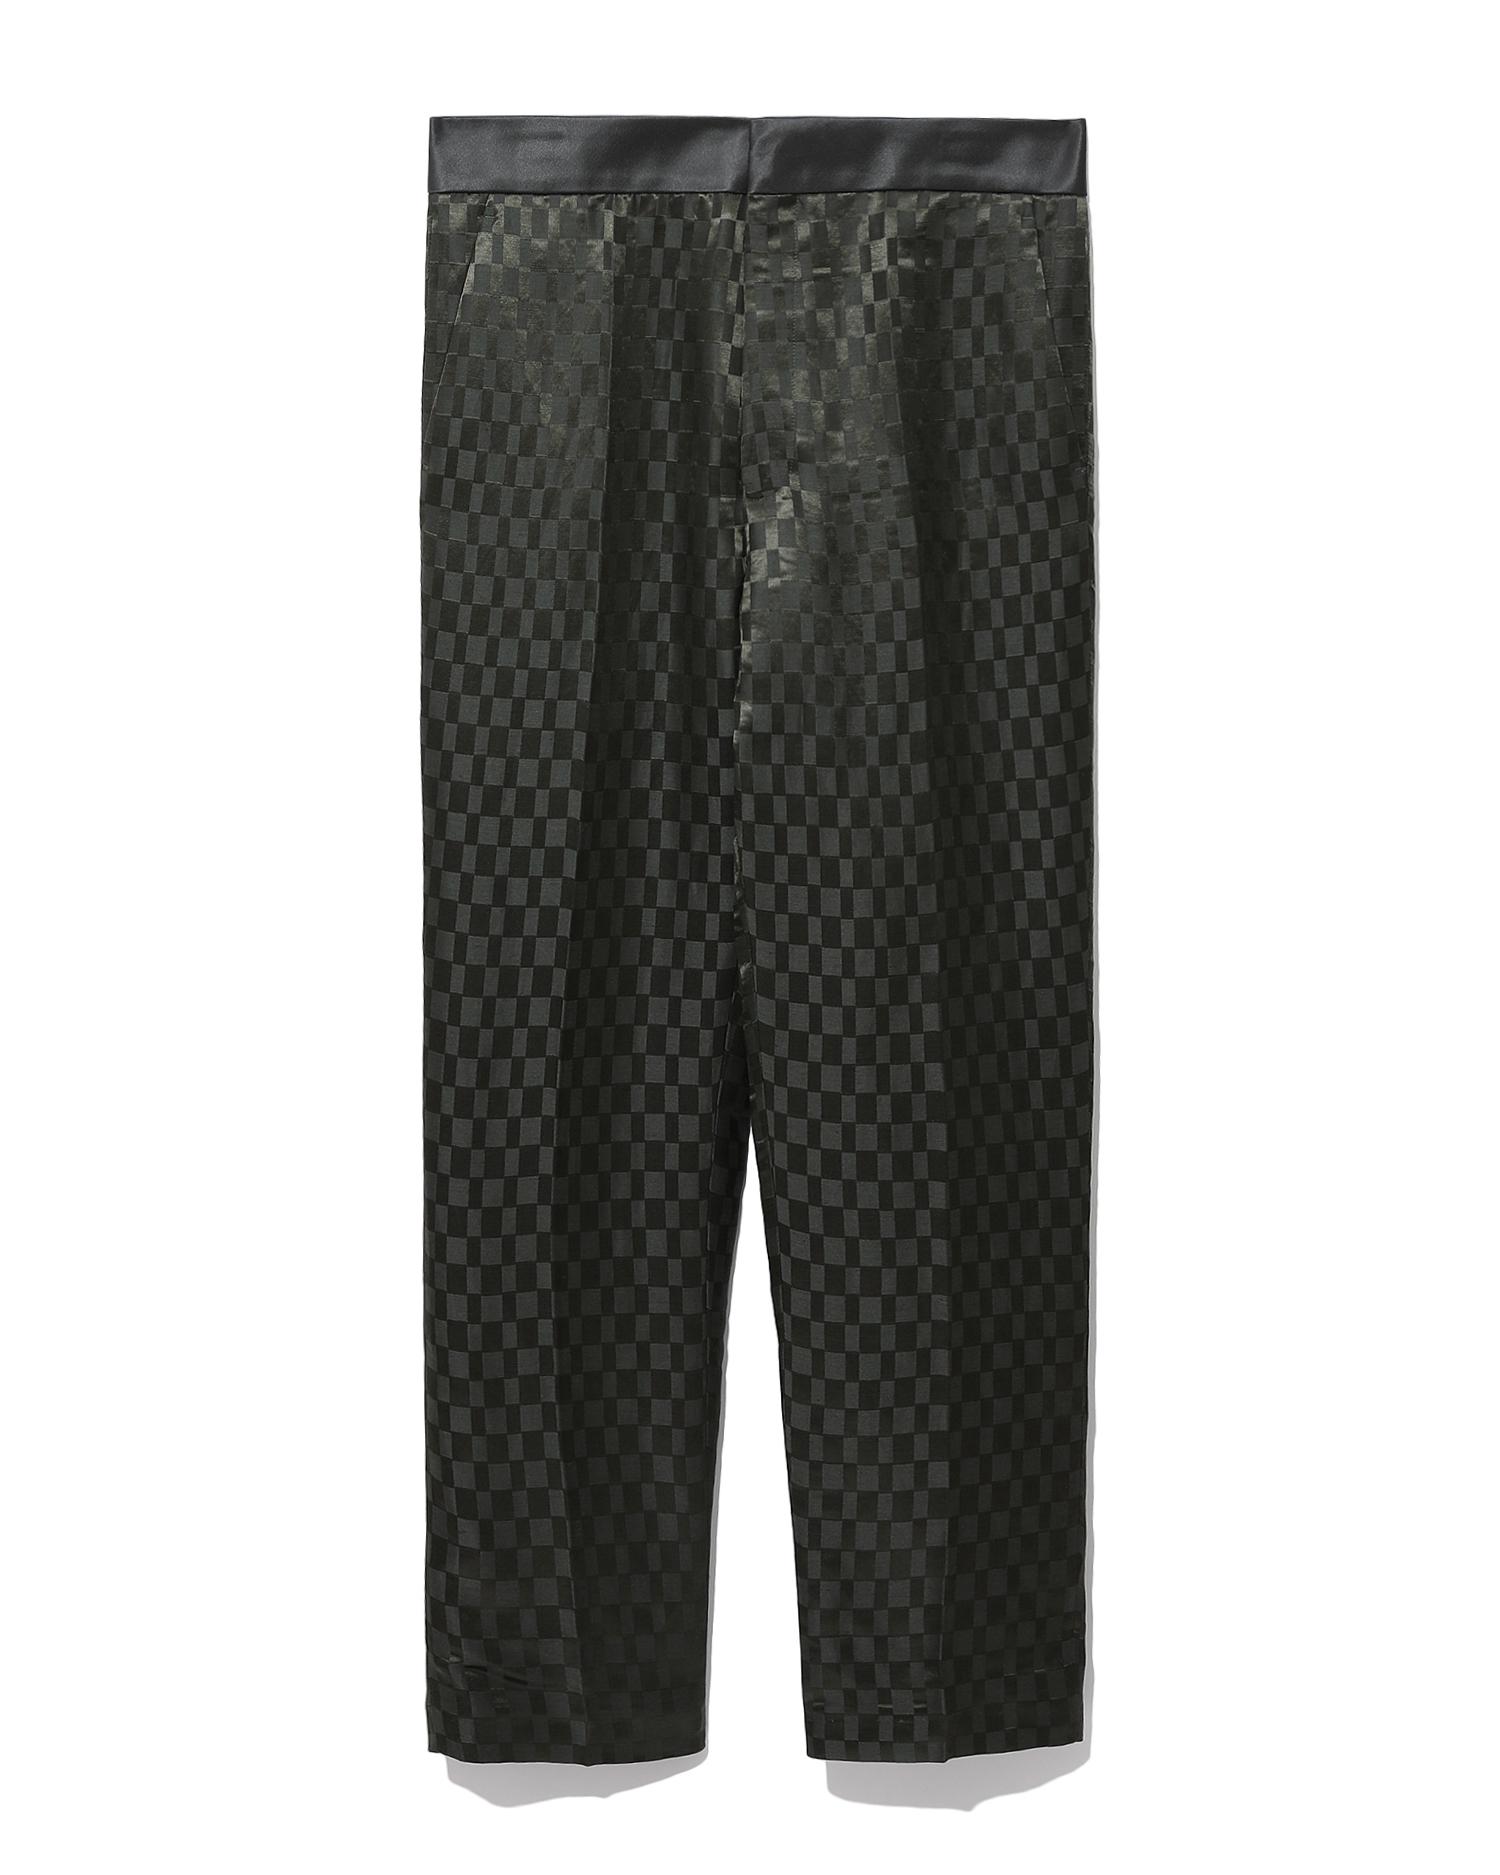 Patterned pants by HAIDER ACKERMANN